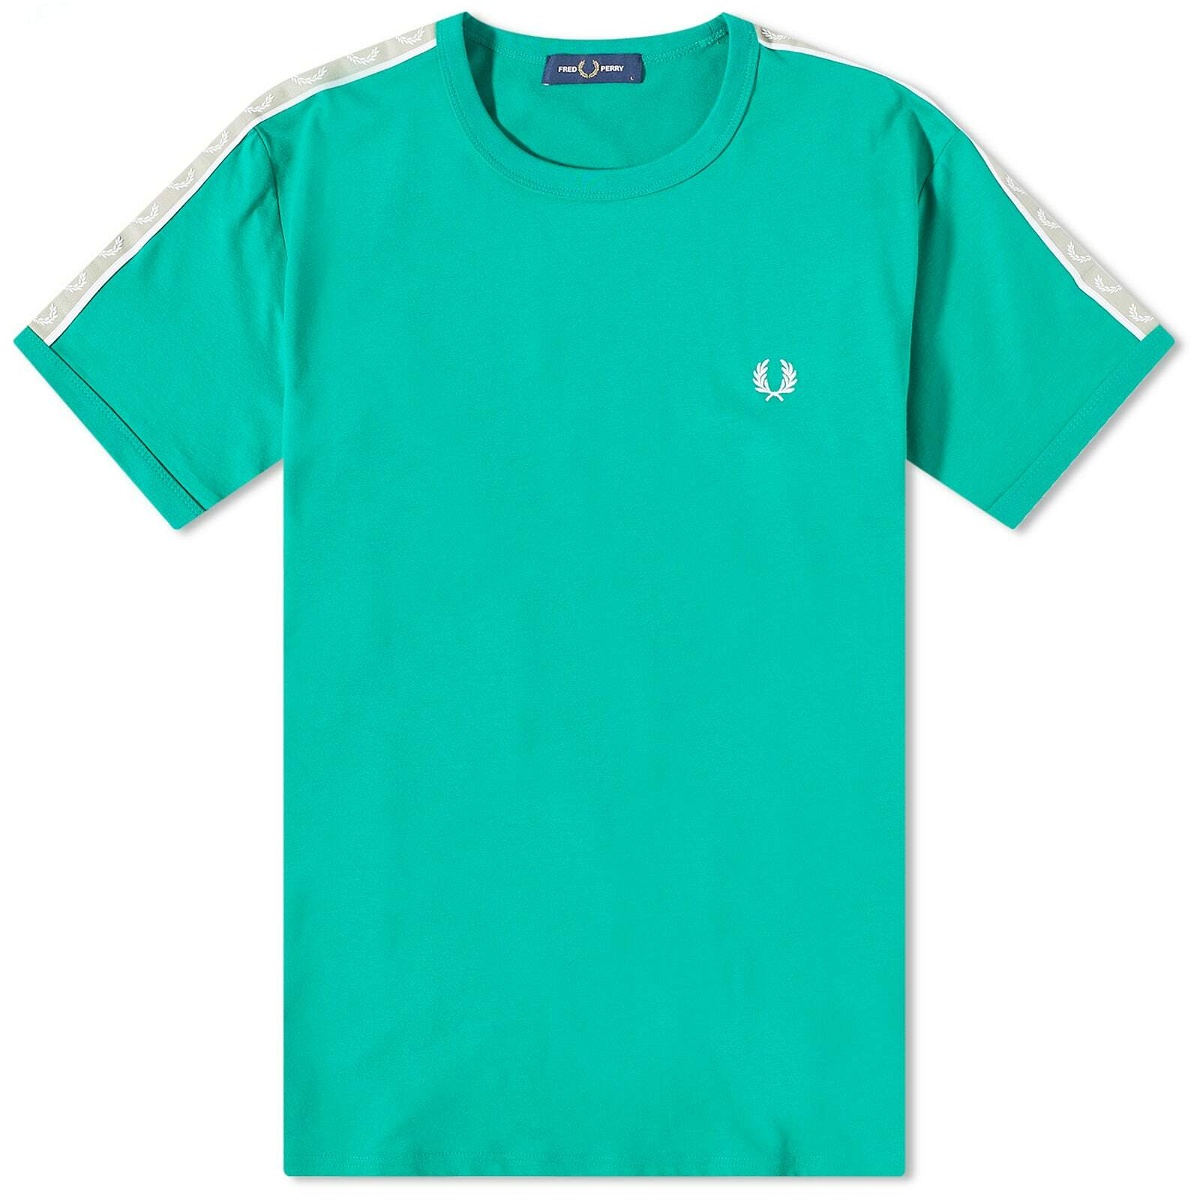 Fred Perry Authentic Men's Contrast Tape Ringer T-Shirt in Shaded ...